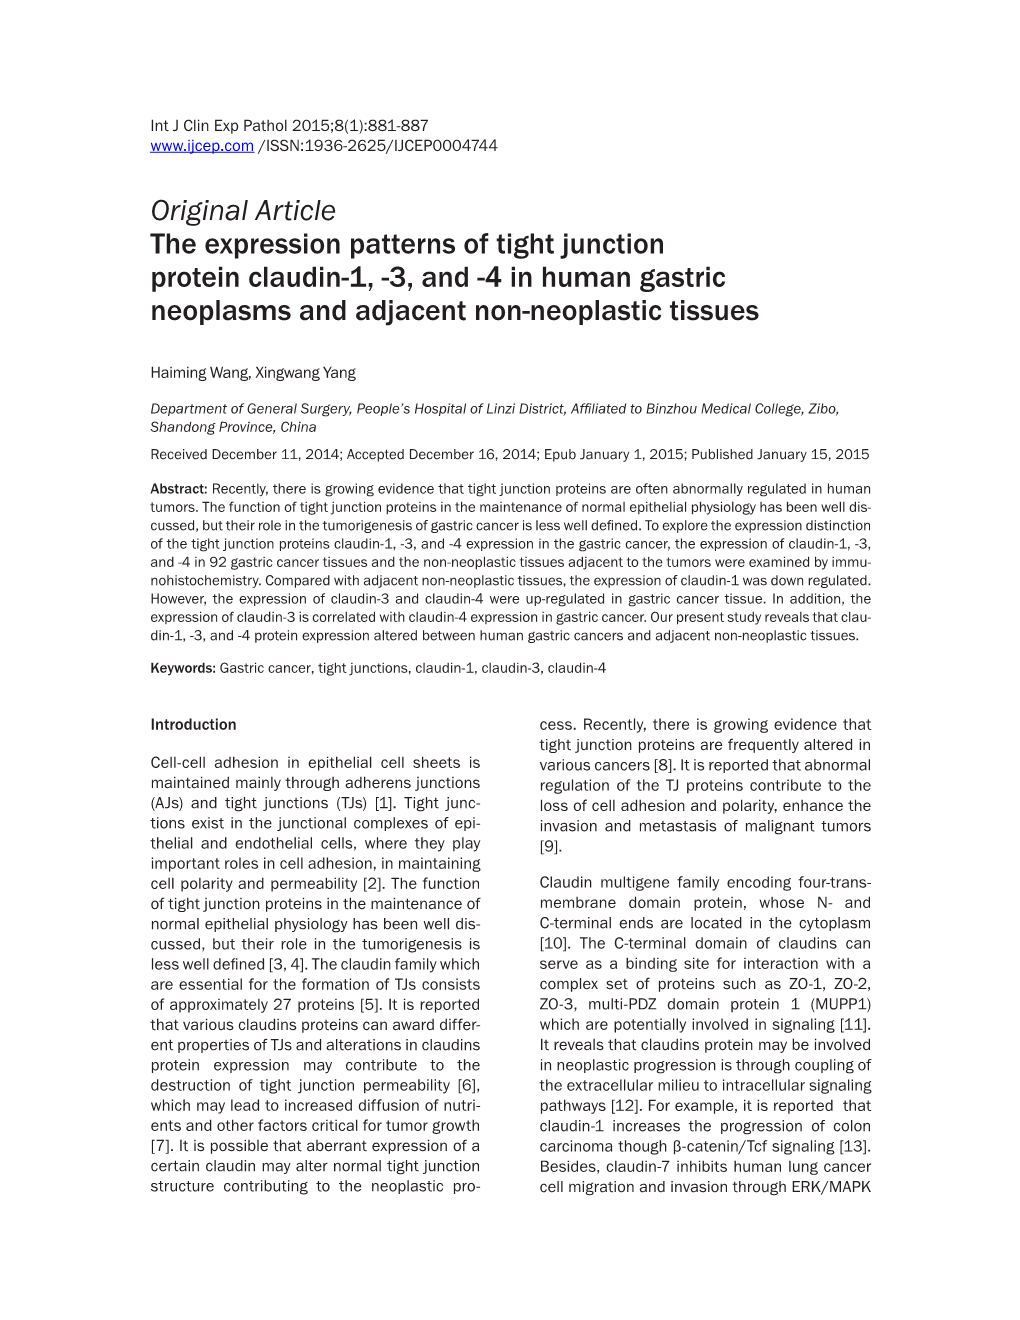 Original Article the Expression Patterns of Tight Junction Protein Claudin-1, -3, and -4 in Human Gastric Neoplasms and Adjacent Non-Neoplastic Tissues